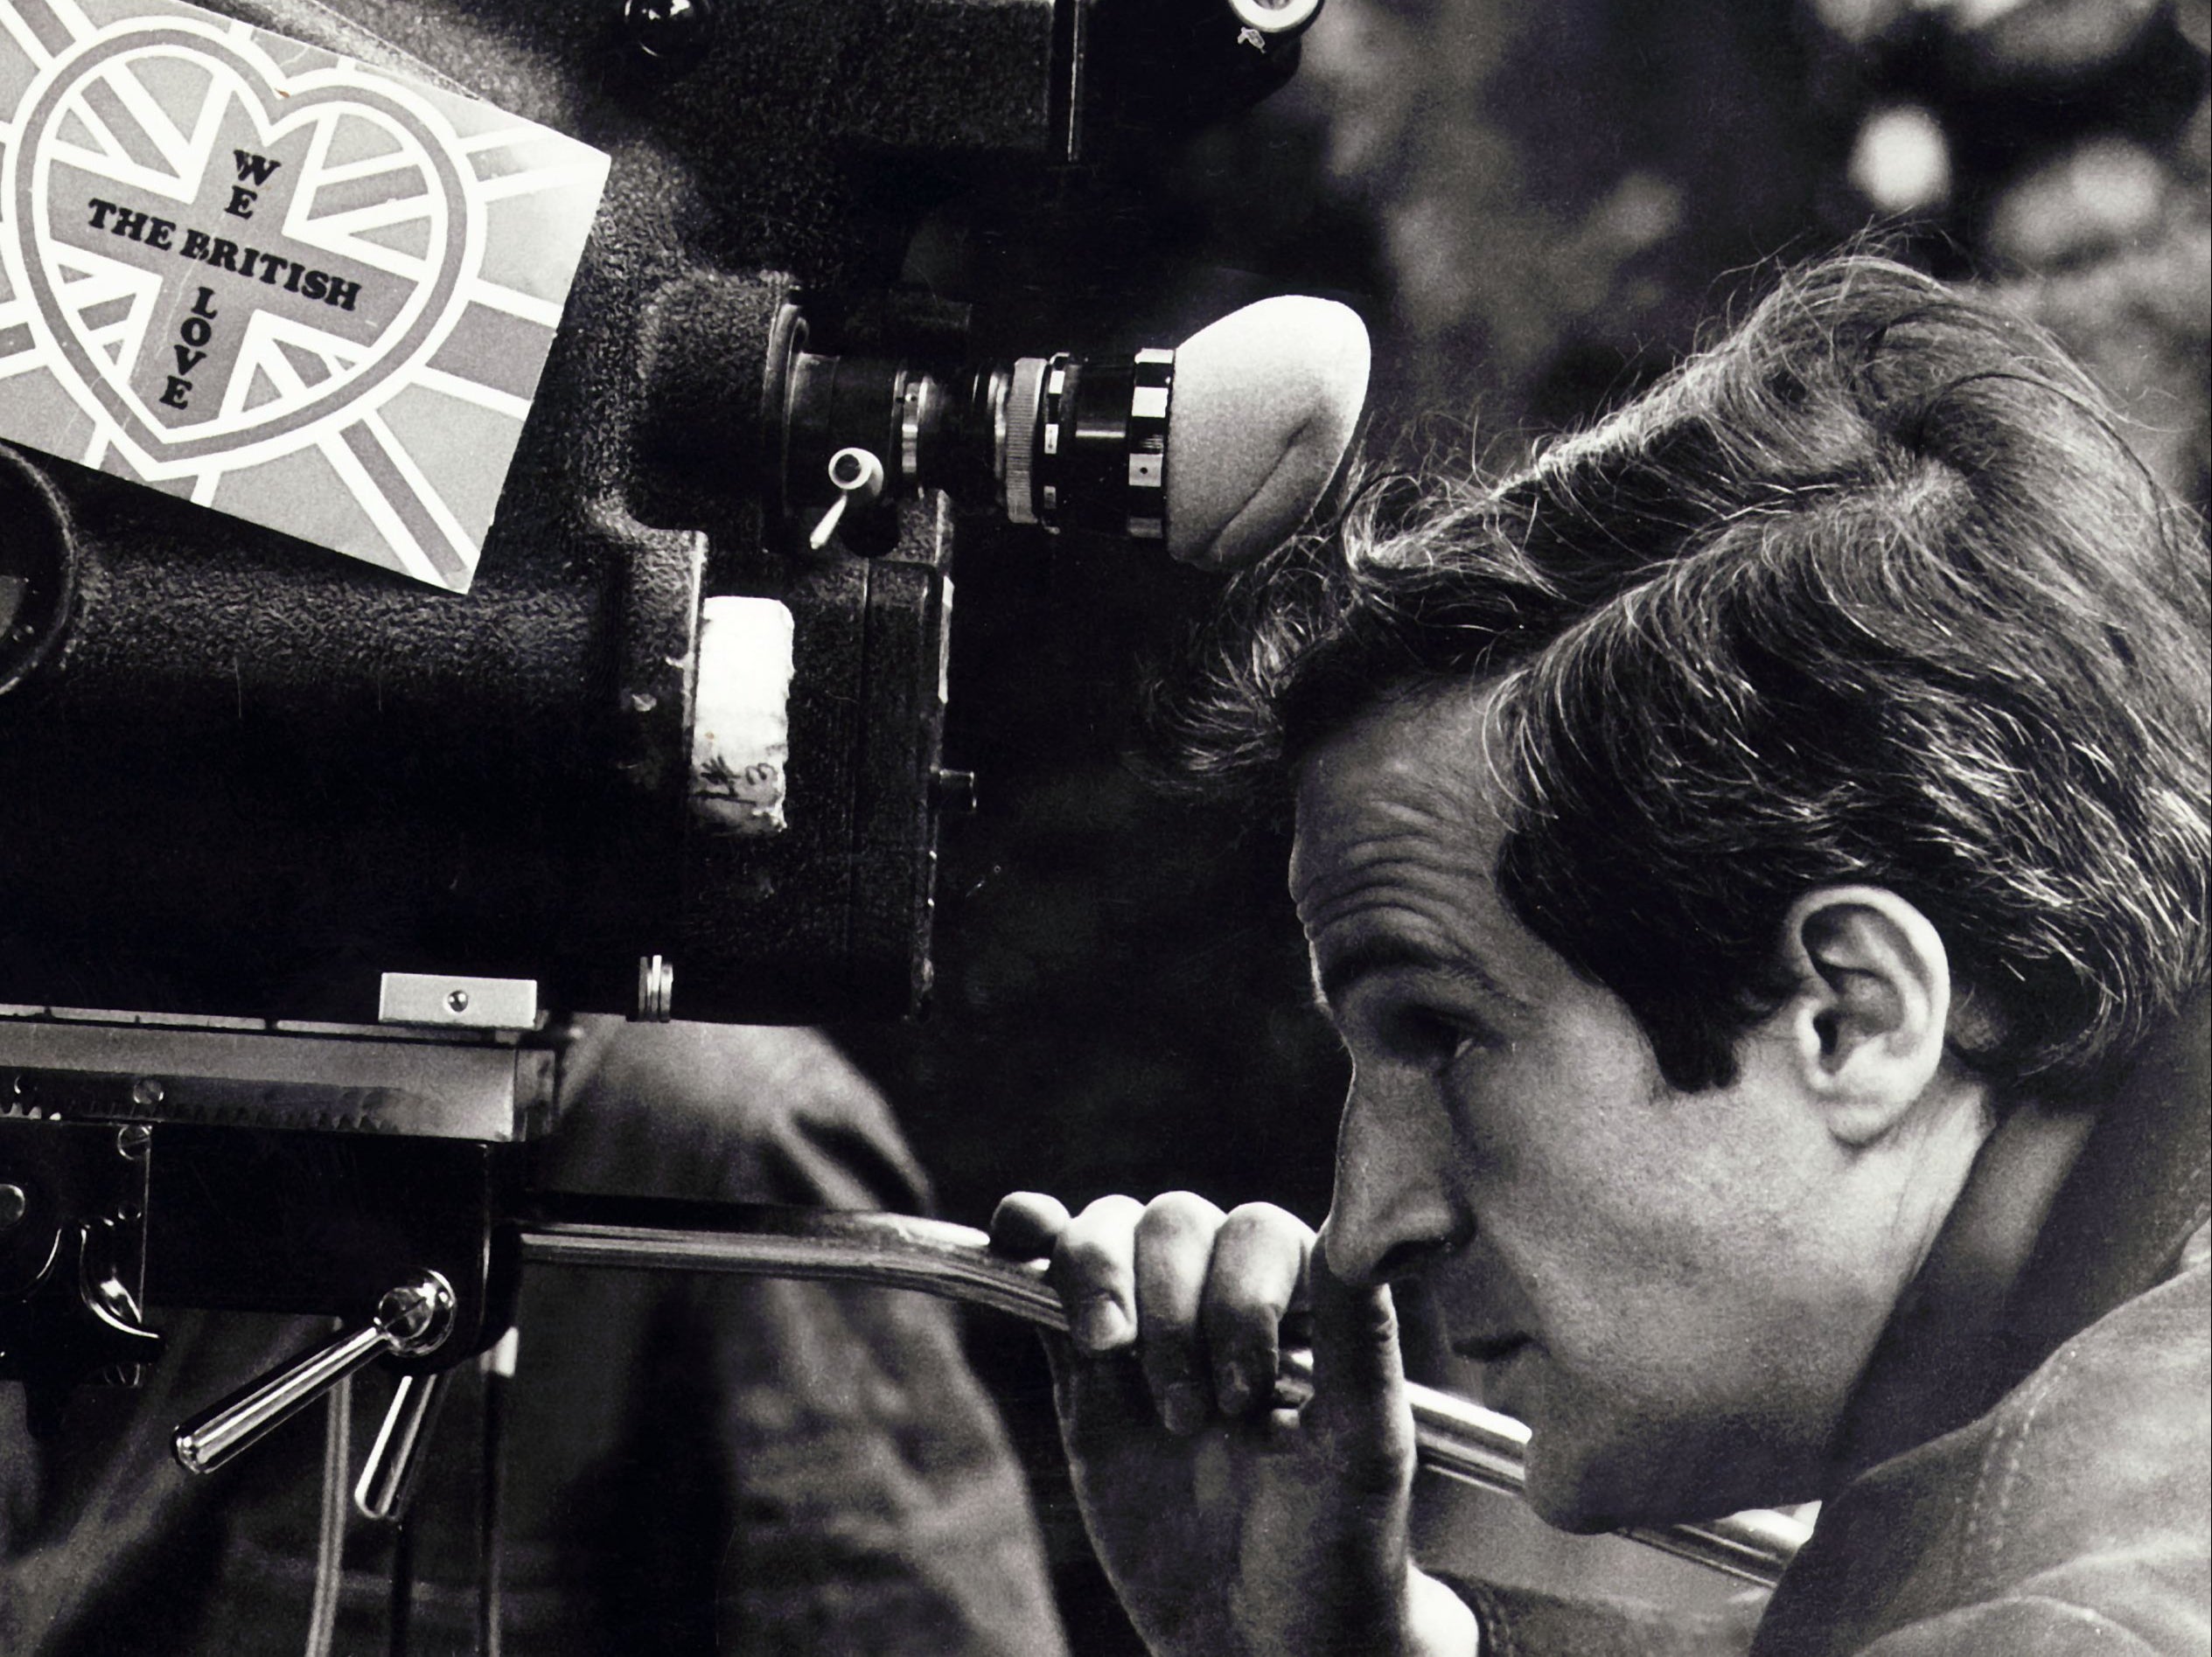 Movie magic: the director at work in 1966